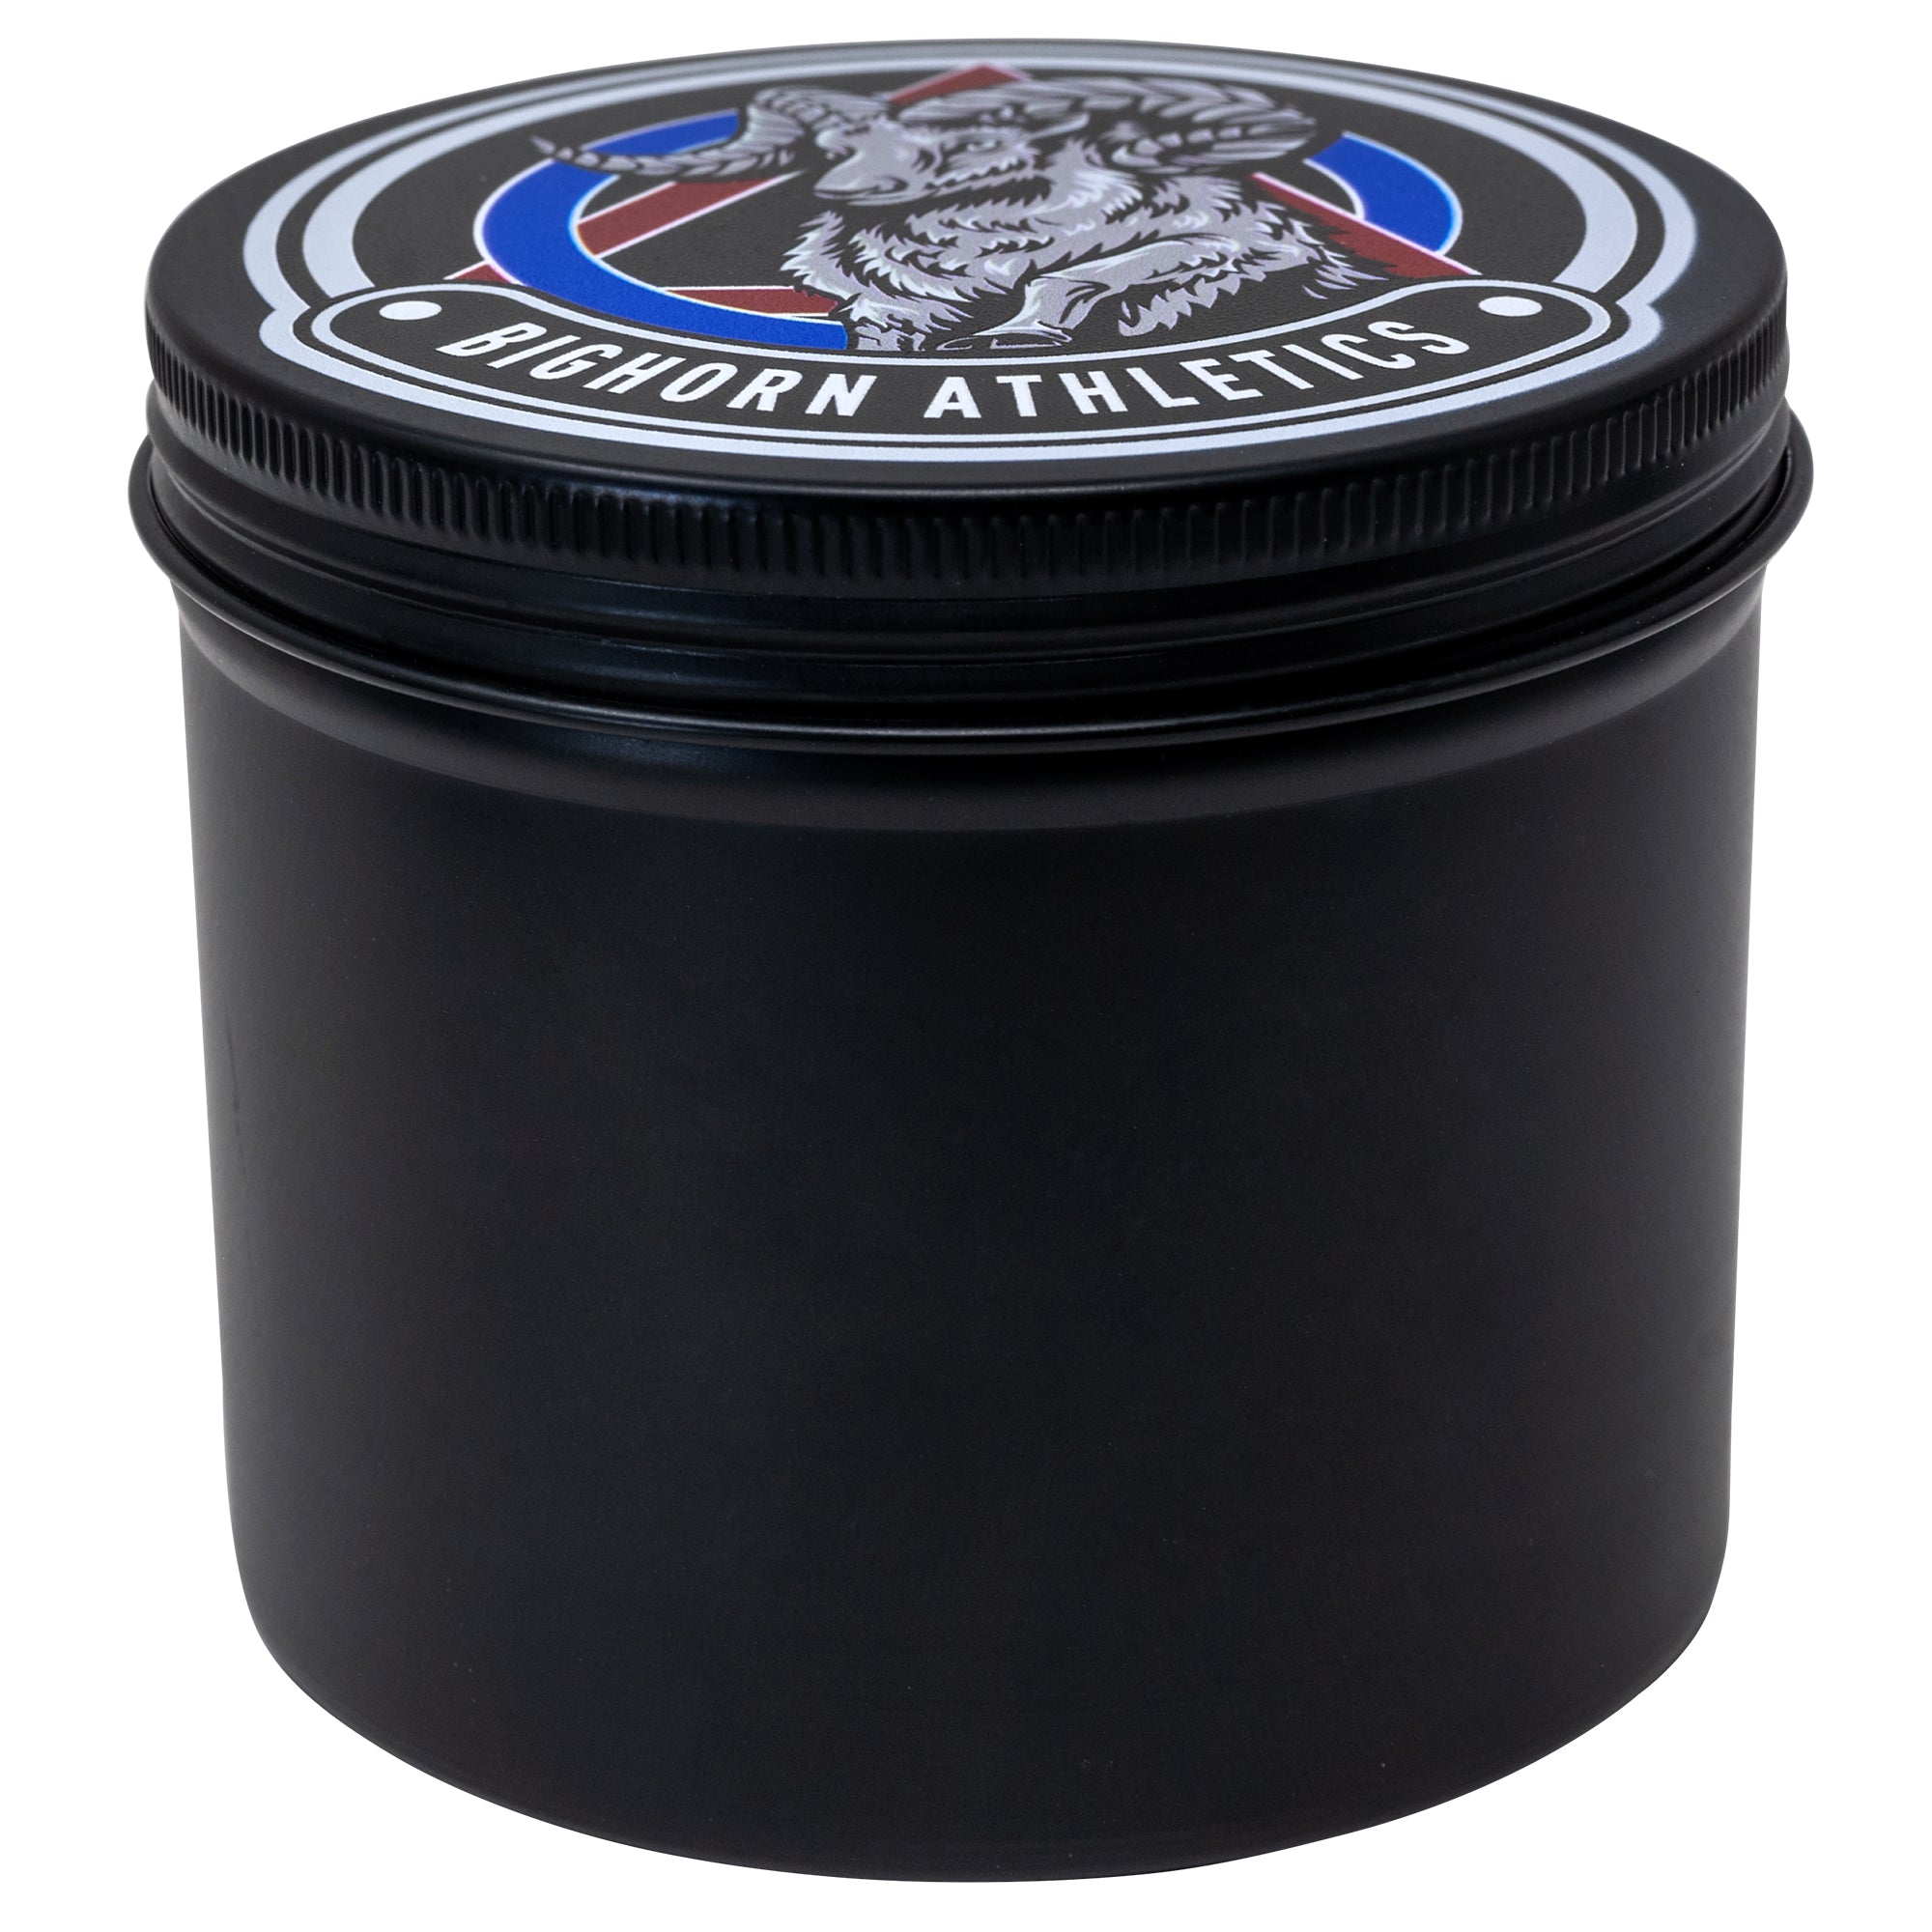 Pro-Series Black Tin Can Holder, Medium - Tape Not Included